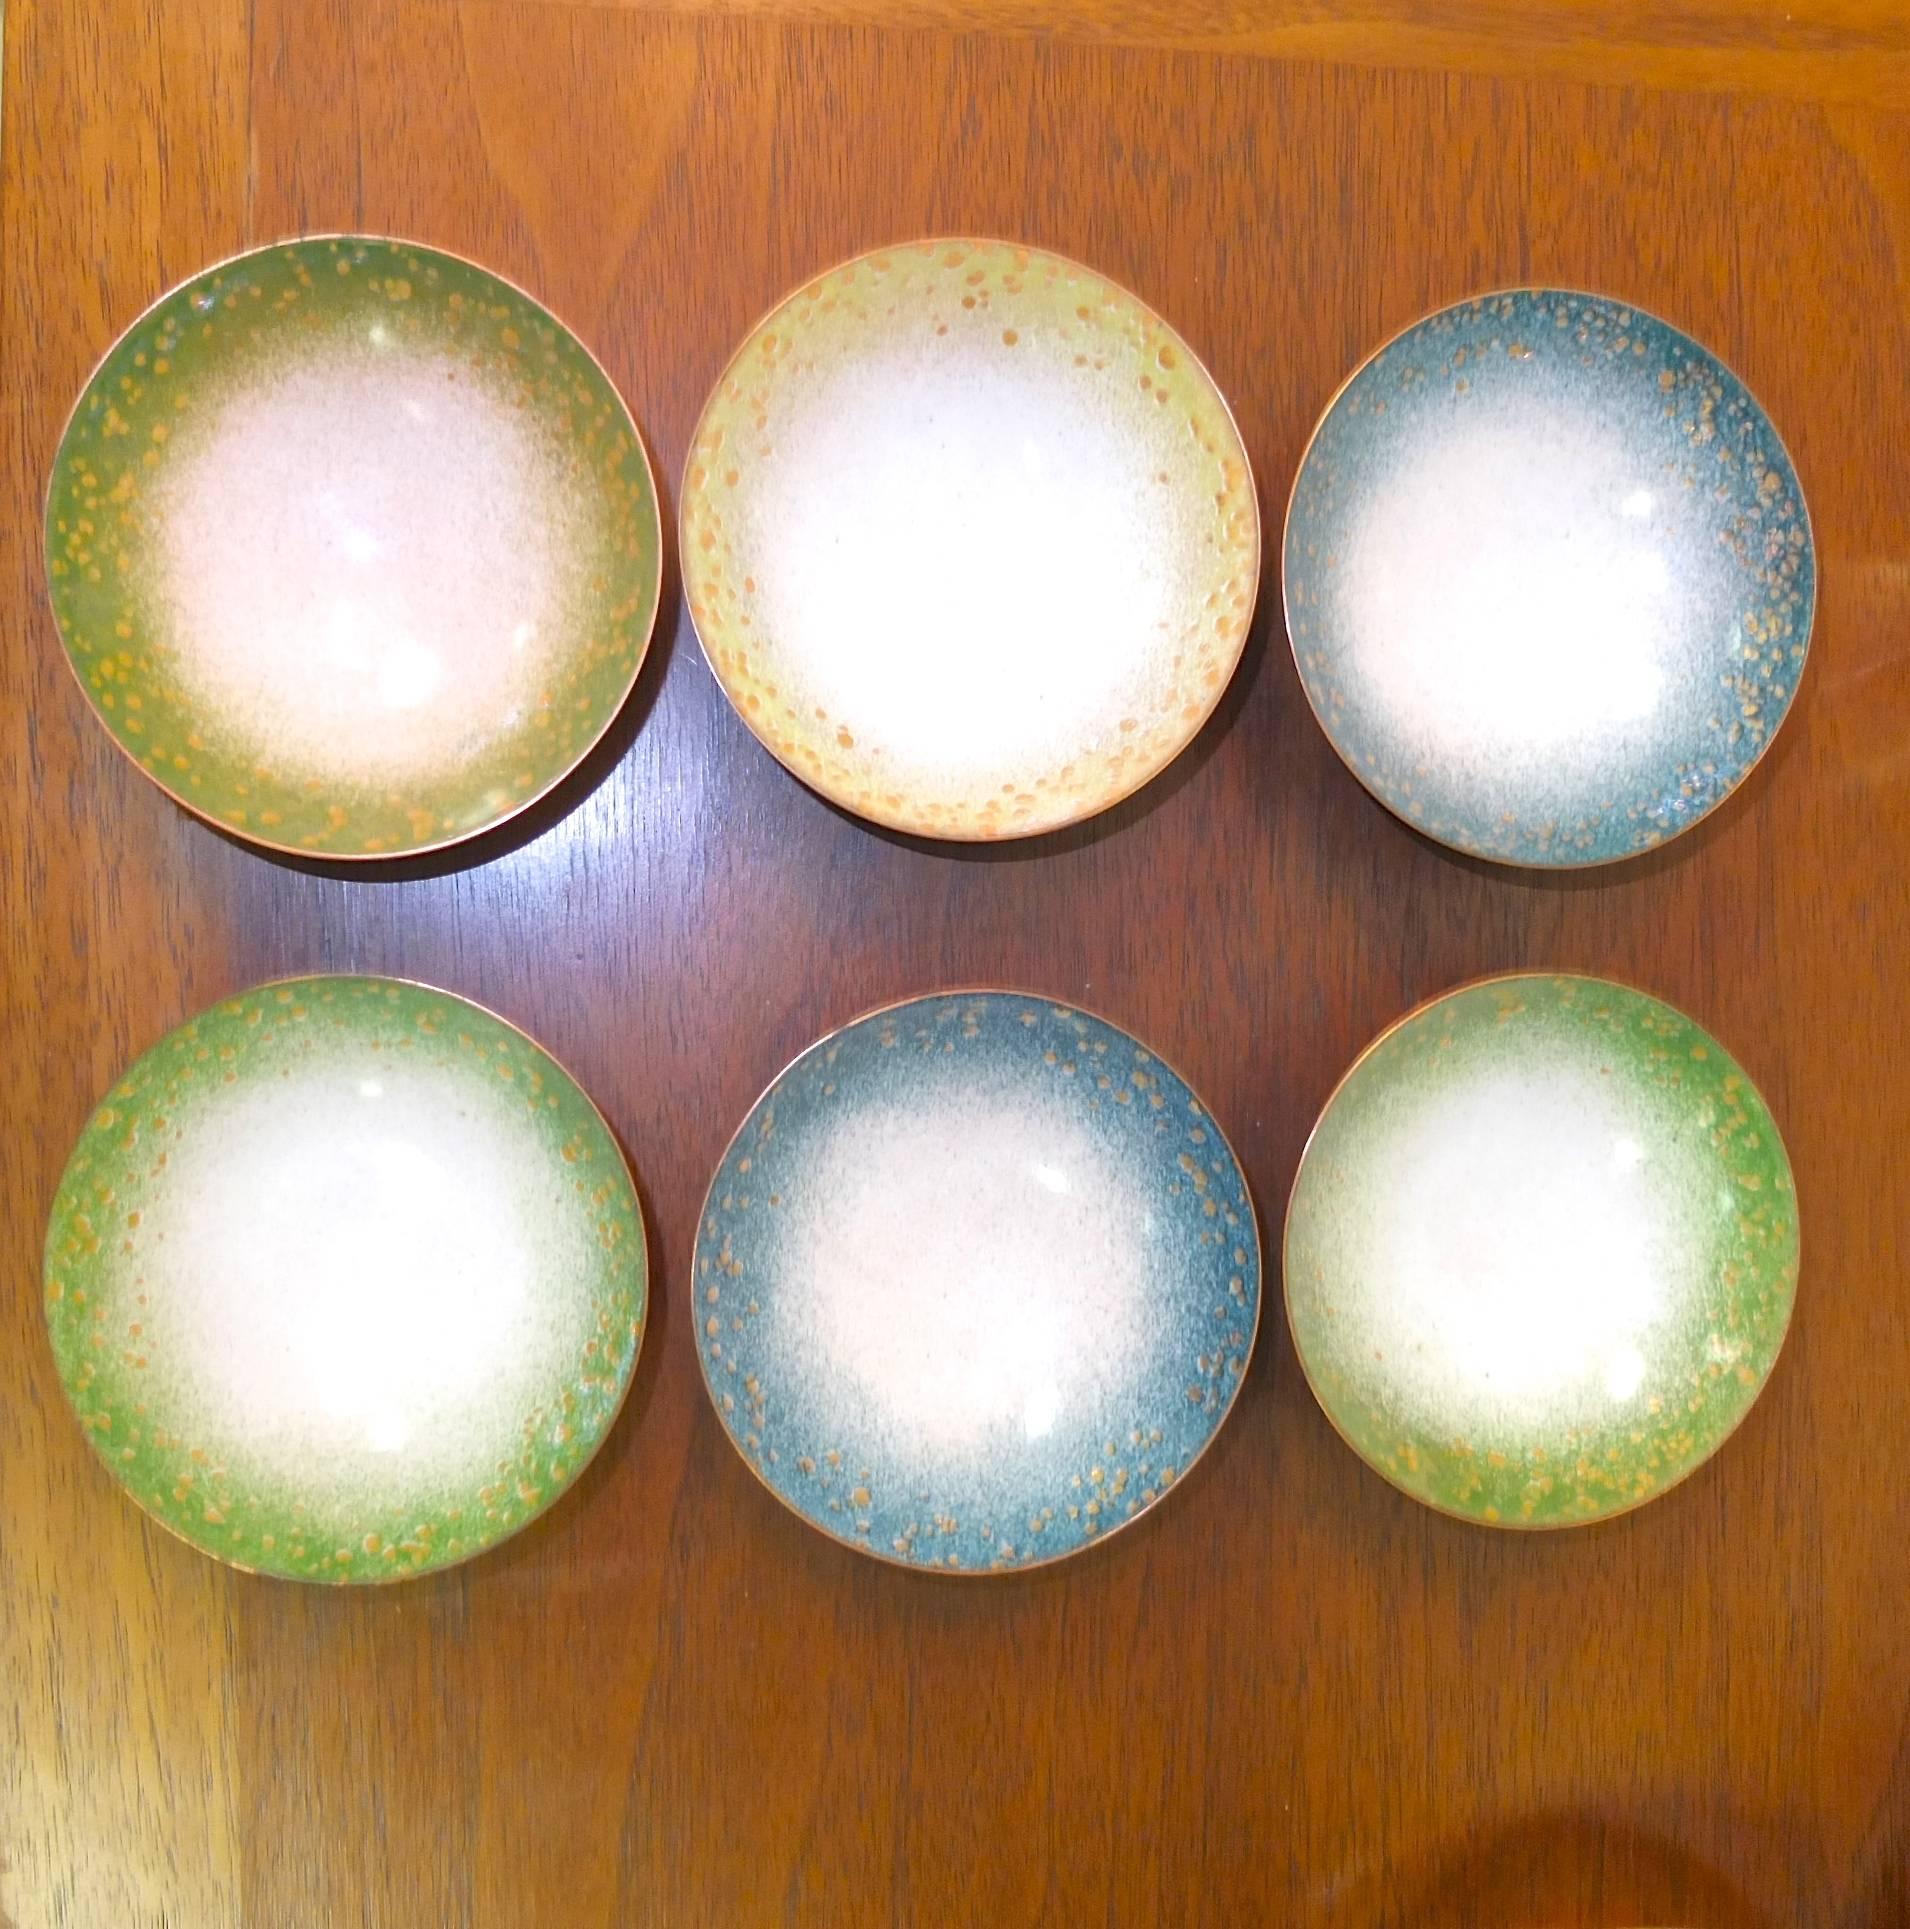 Lovely set of six Italian Mid-Century enameled copper pin dishes or ashtrays. Each bowl is enameled blue on the underside with a round copper foot.

Measures: 3-1/2 inches diameter and 1-1/2 inches high.

In the style of Paolo di Poli.